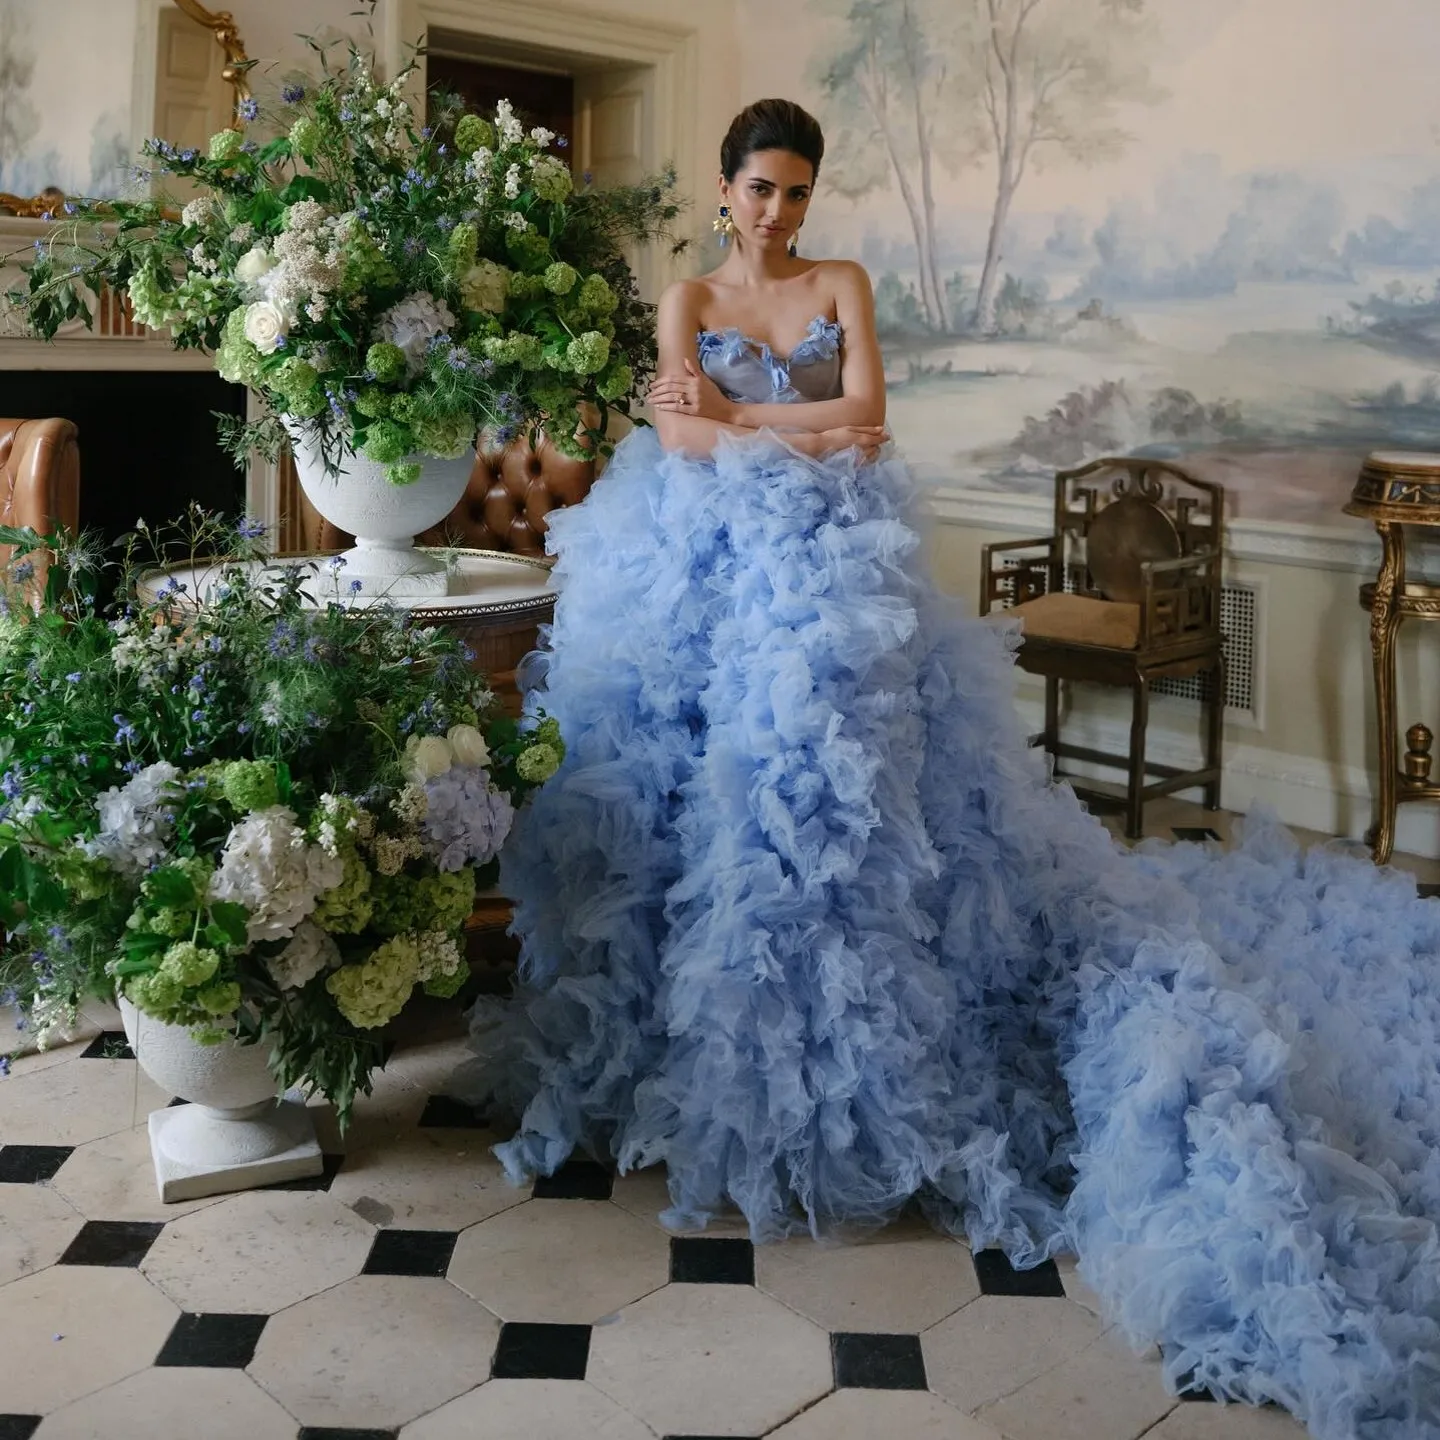 

Fairytale Blue Fluffy Tiered Tulle Bridal Dresses With Long Train Lush Tutu Tulle Long Maxi Gowns 3D Flower Women Fomral Dress